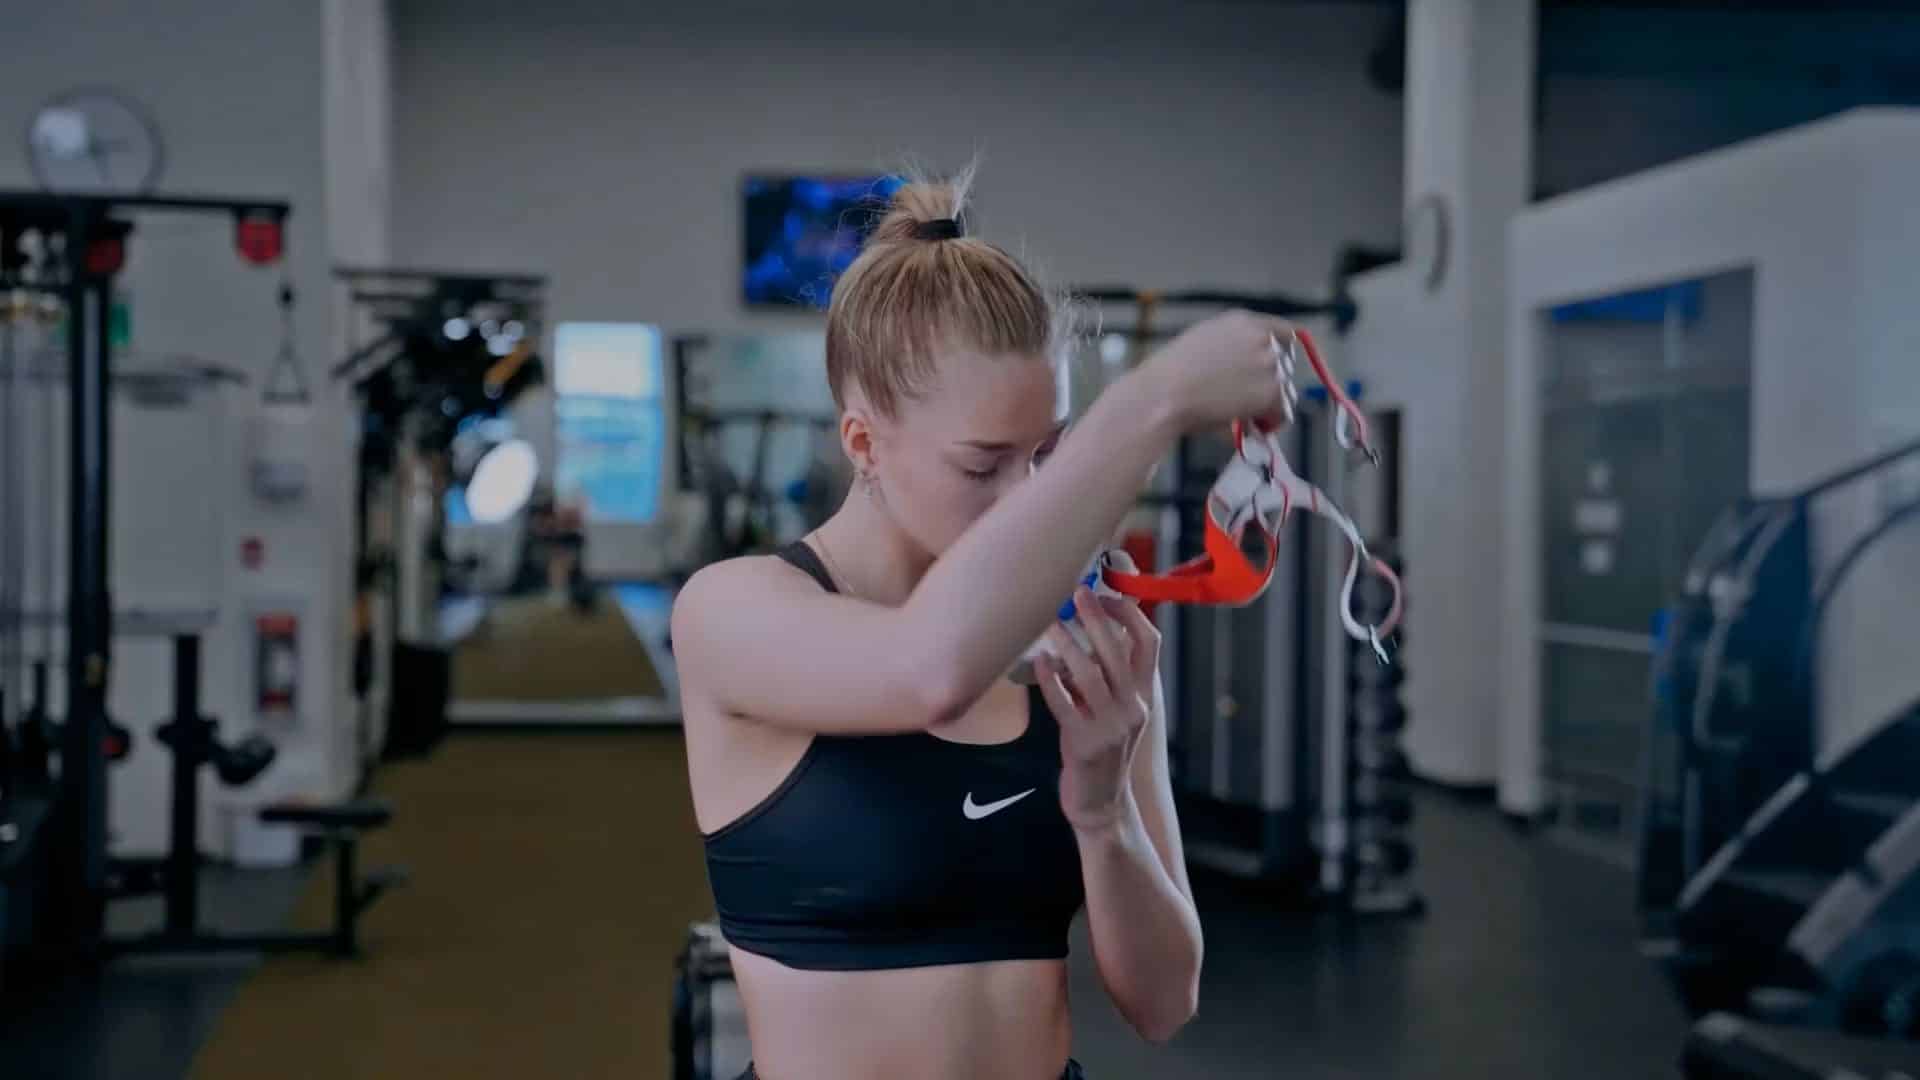 woman shown putting on a v02 master analyzer in a gym setting preparing to track training metrics.